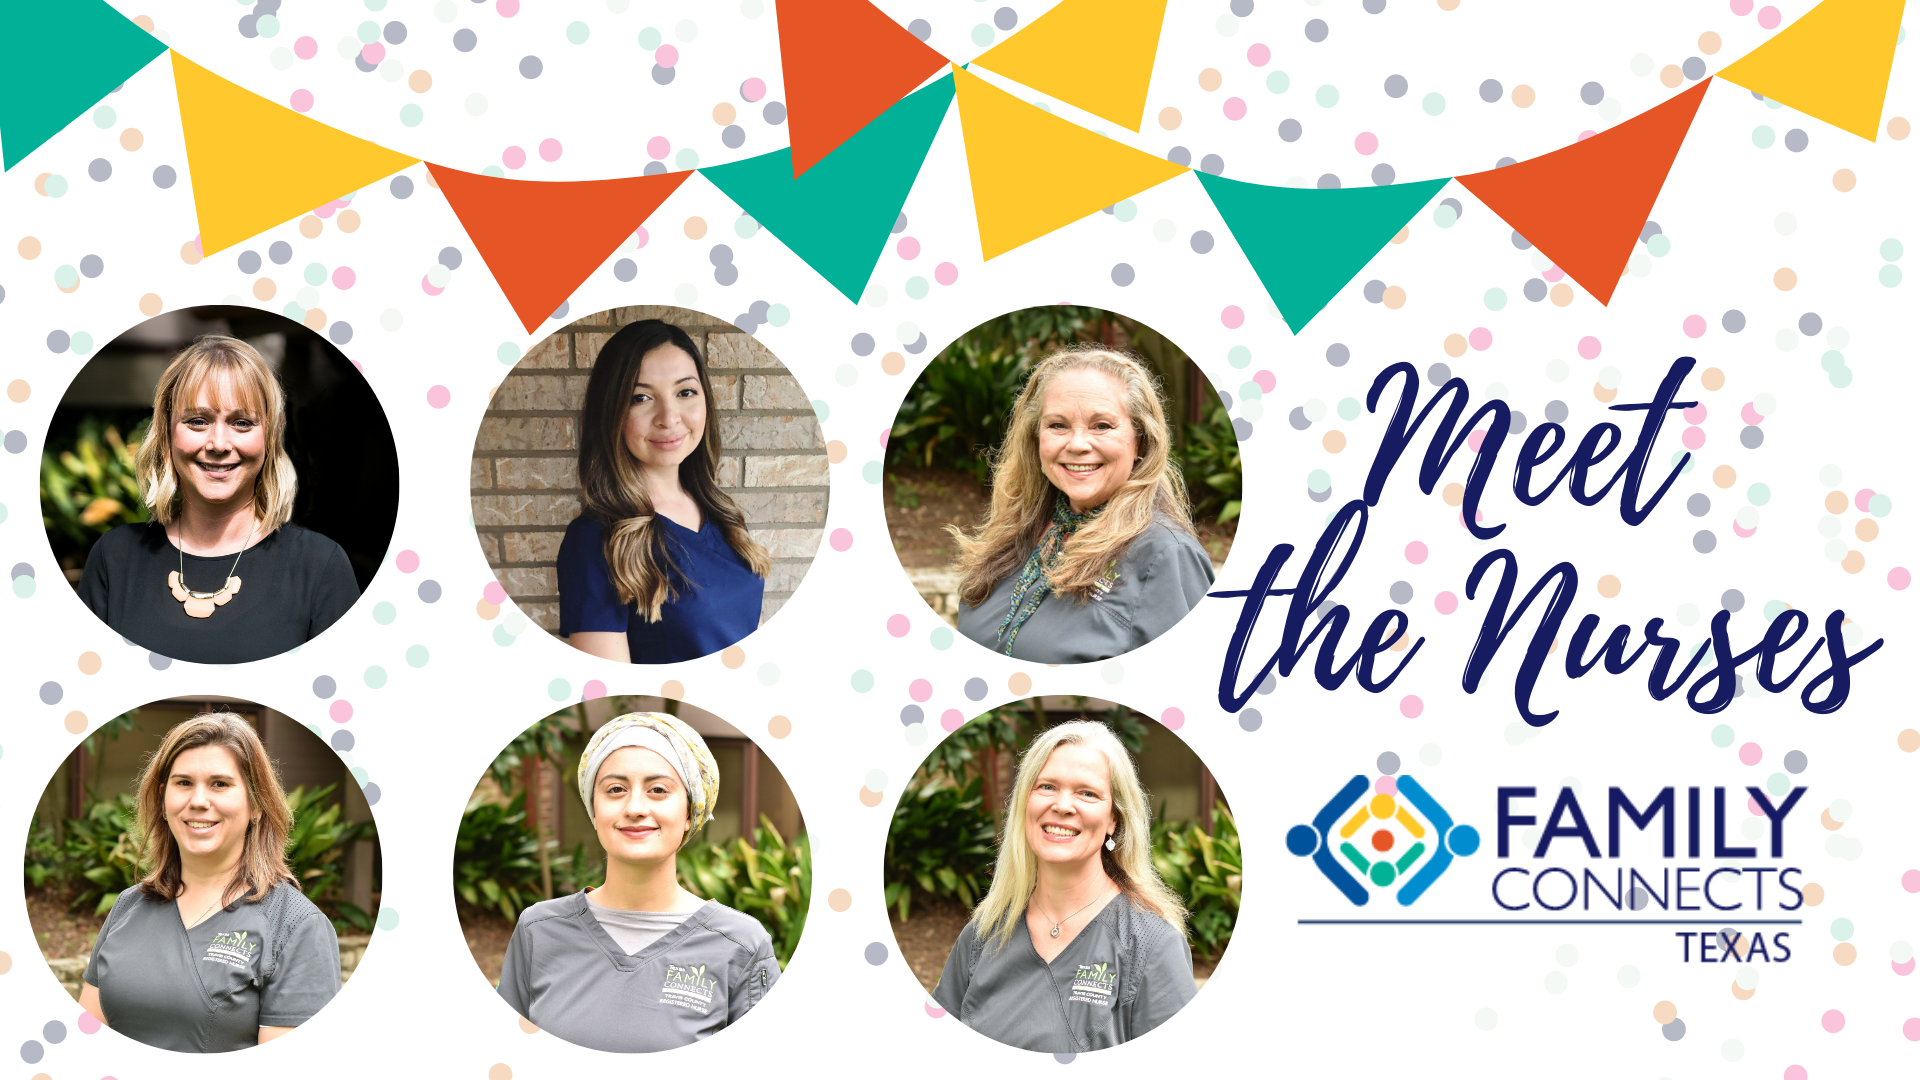 Happy 2nd Birthday Family Connects! Meet the Nurses…